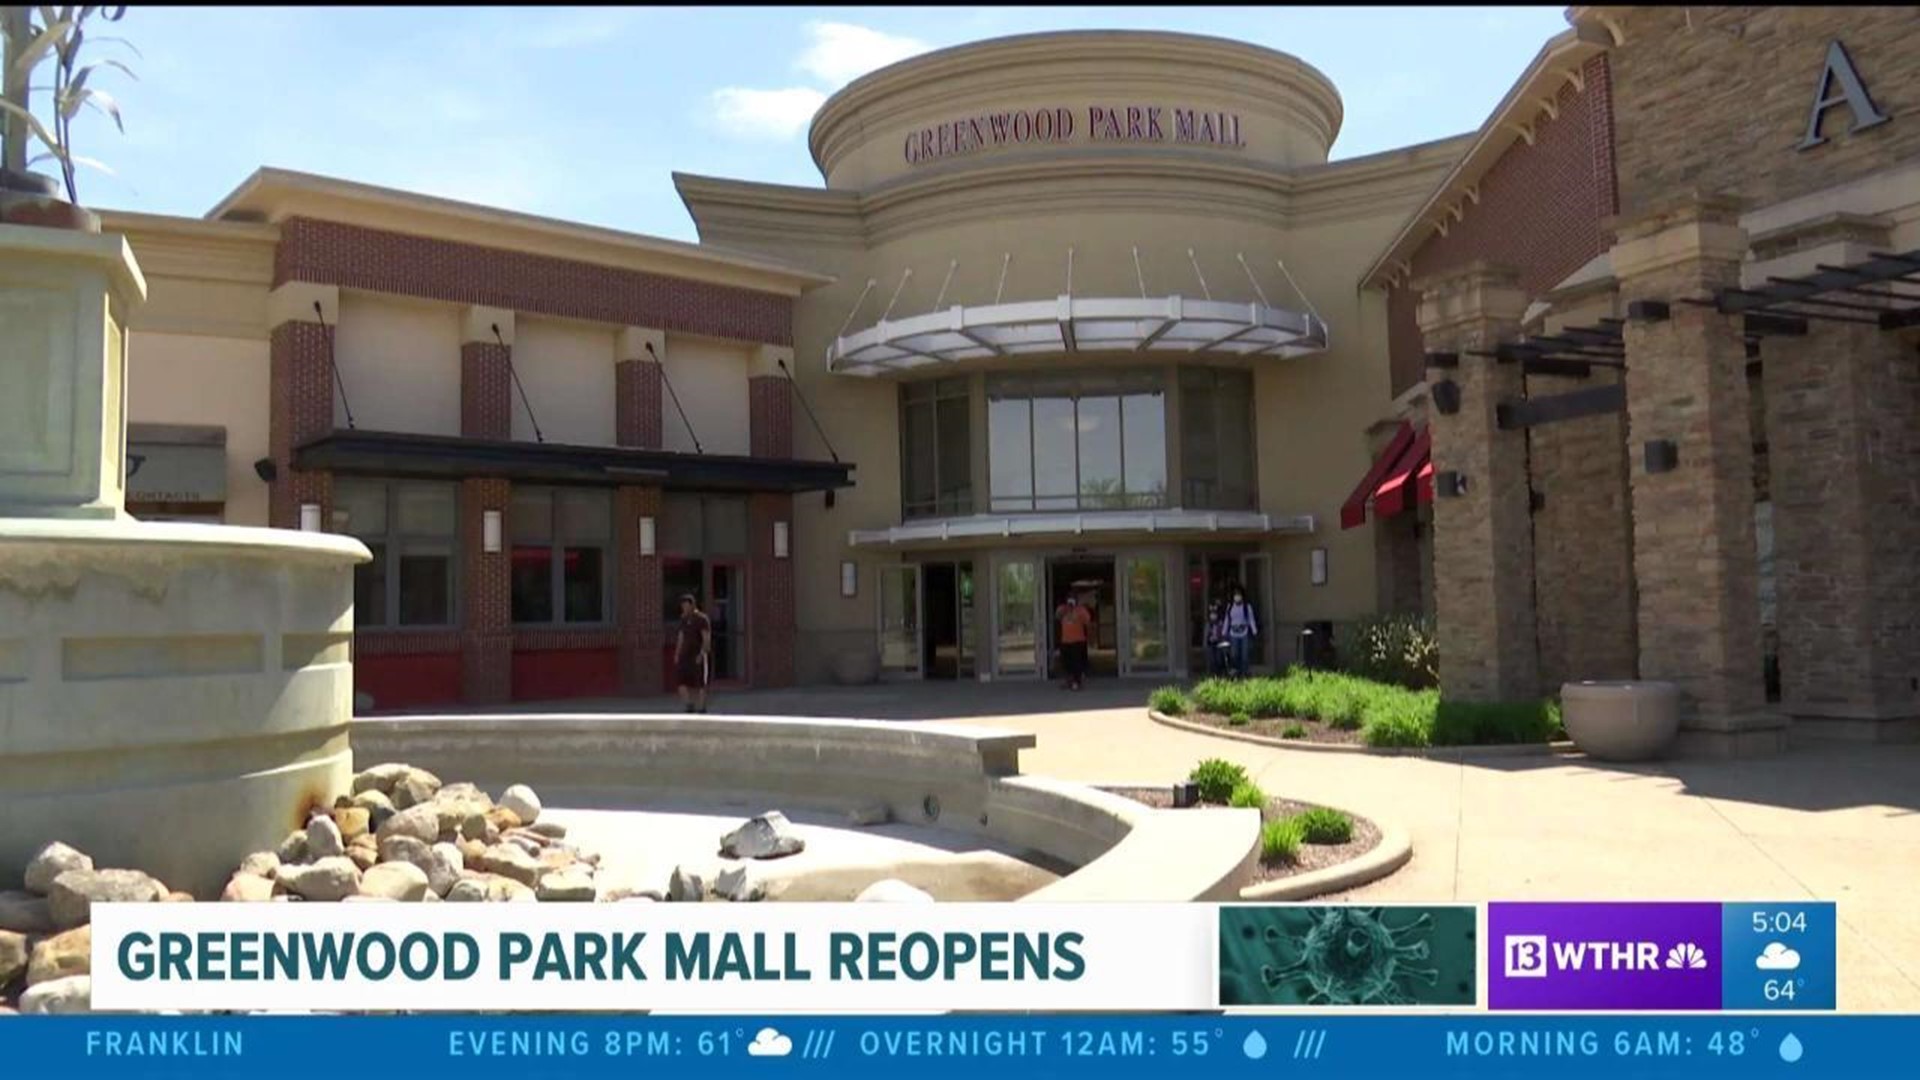 Greenwood Park Mall reopens with new COVID19 safety protocols